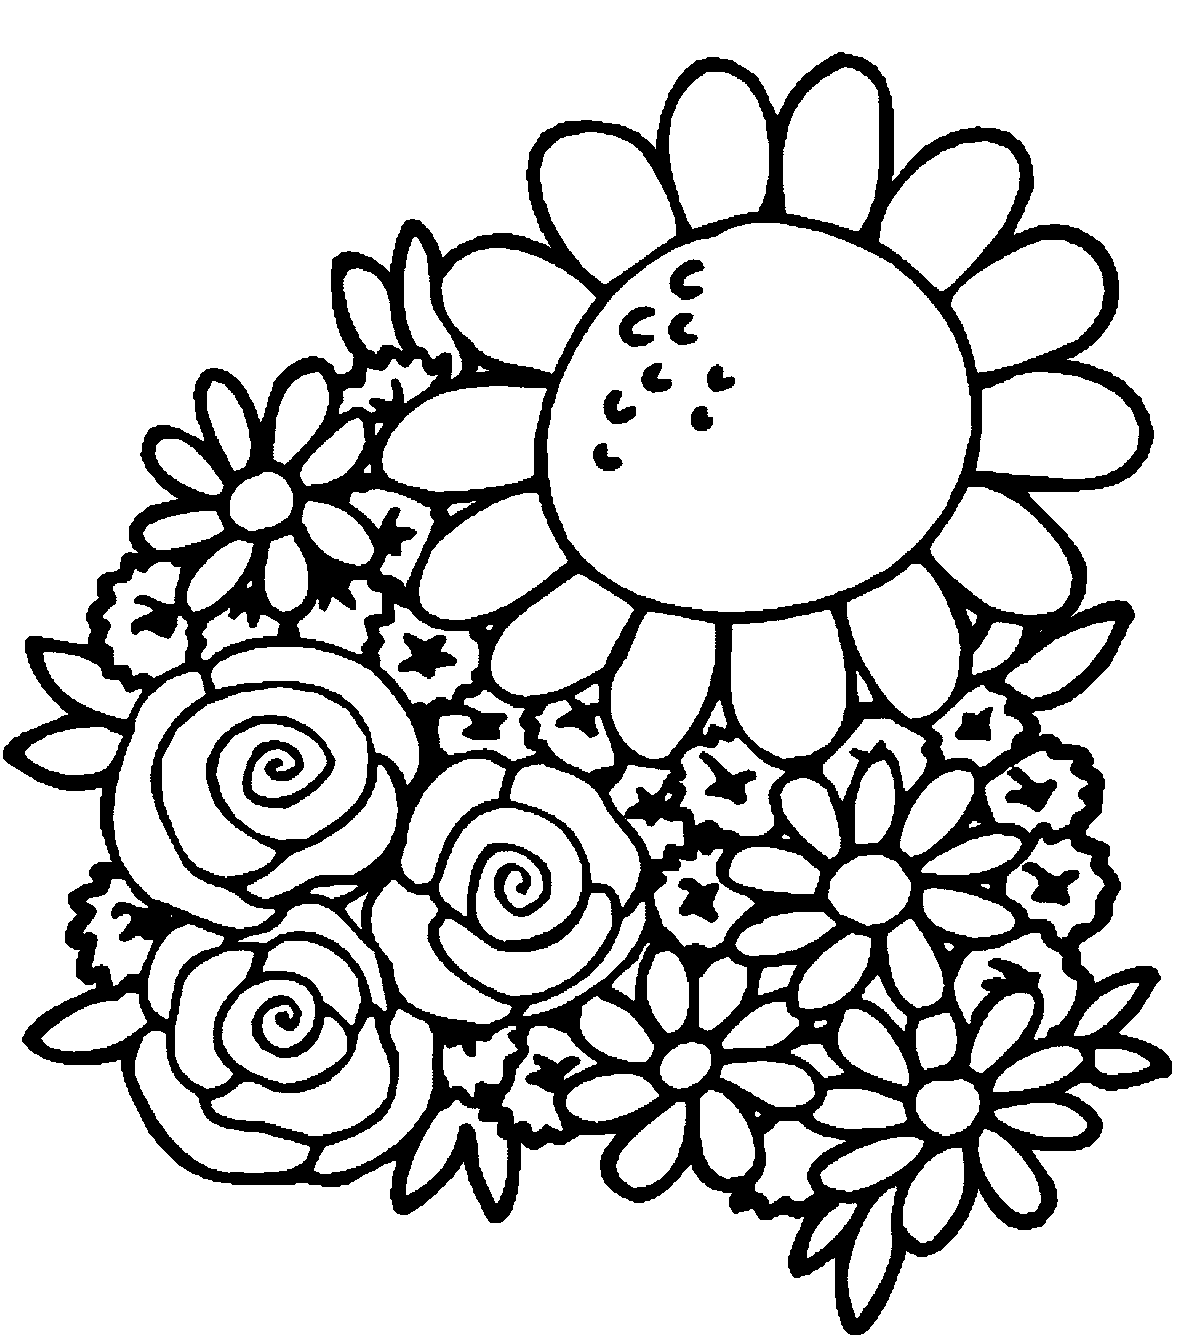 Spring Break Spring Flower Coloring Page | Wecoloringpage